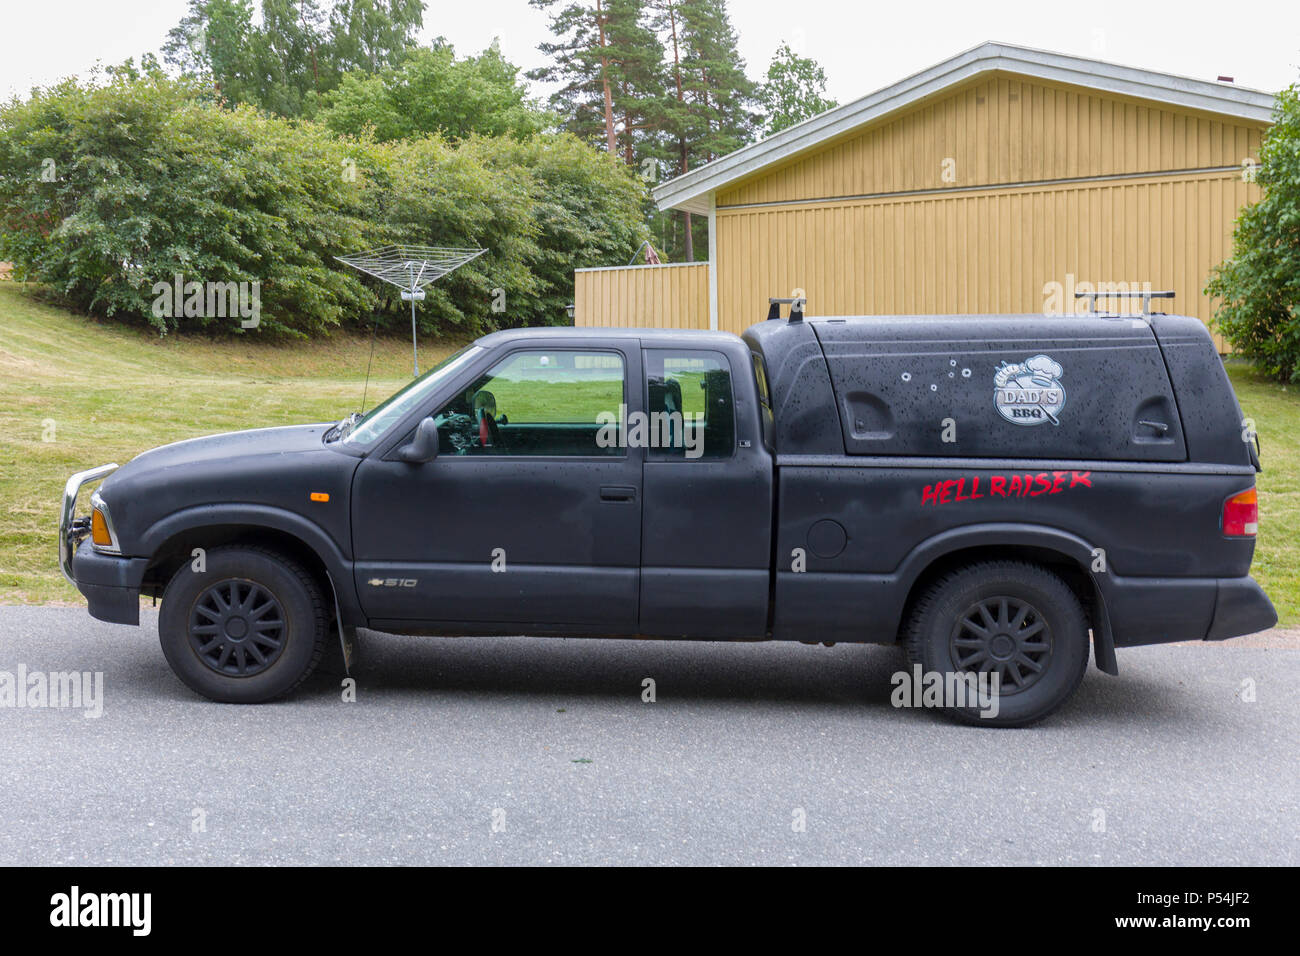 View of black custom pick up truck called Hellraiser and Dad's BBQ Stock Photo